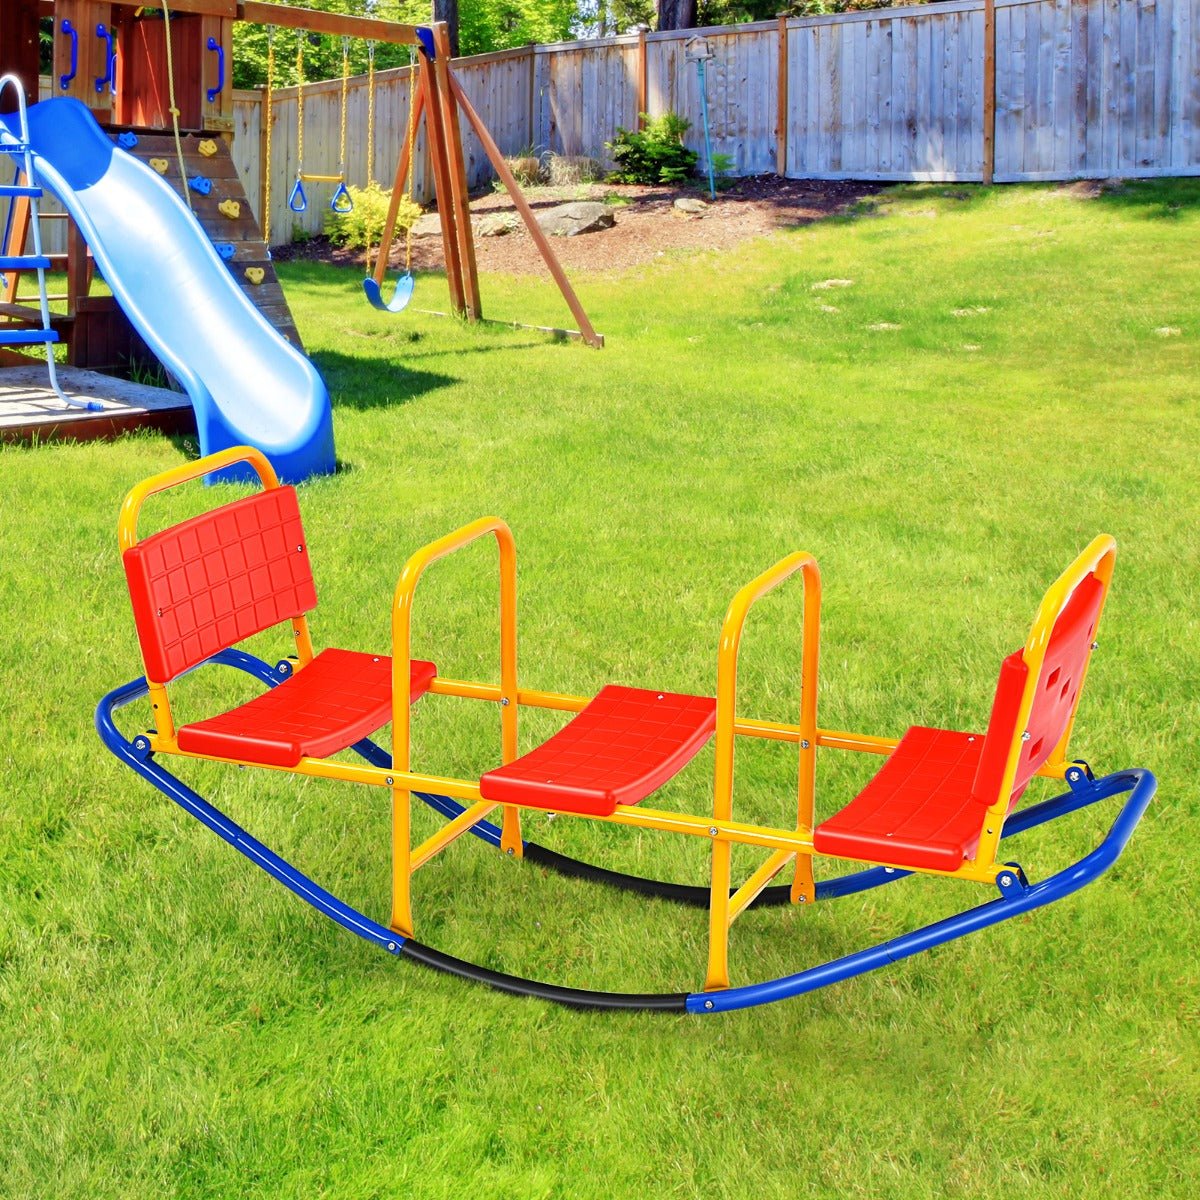 Kids Rocking Seesaw: Metal Construction with Secure Handlebars